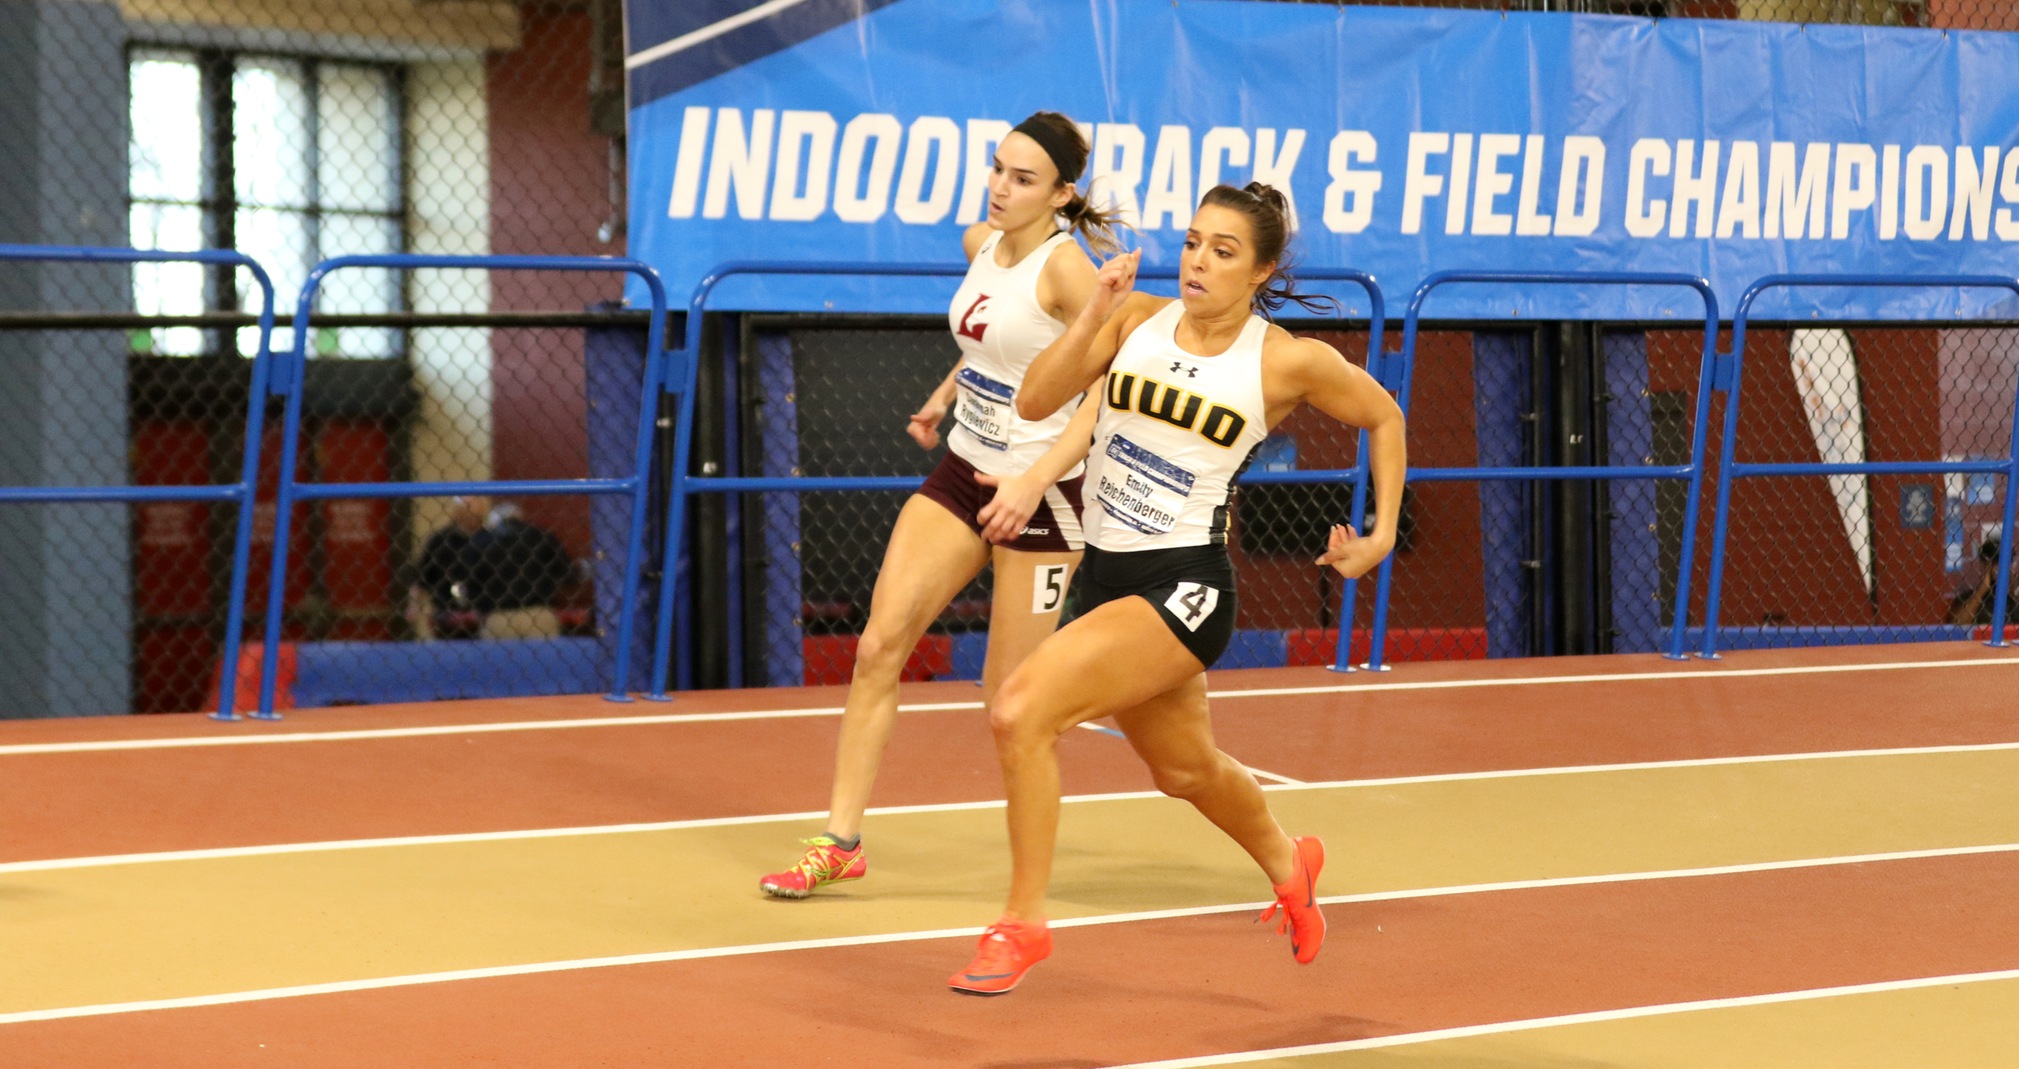 Emily Reichenberger finished sixth in the 60-meter dash and ninth in the 200-meter dash at the NCAA Division III Indoor Track & Field Championships.